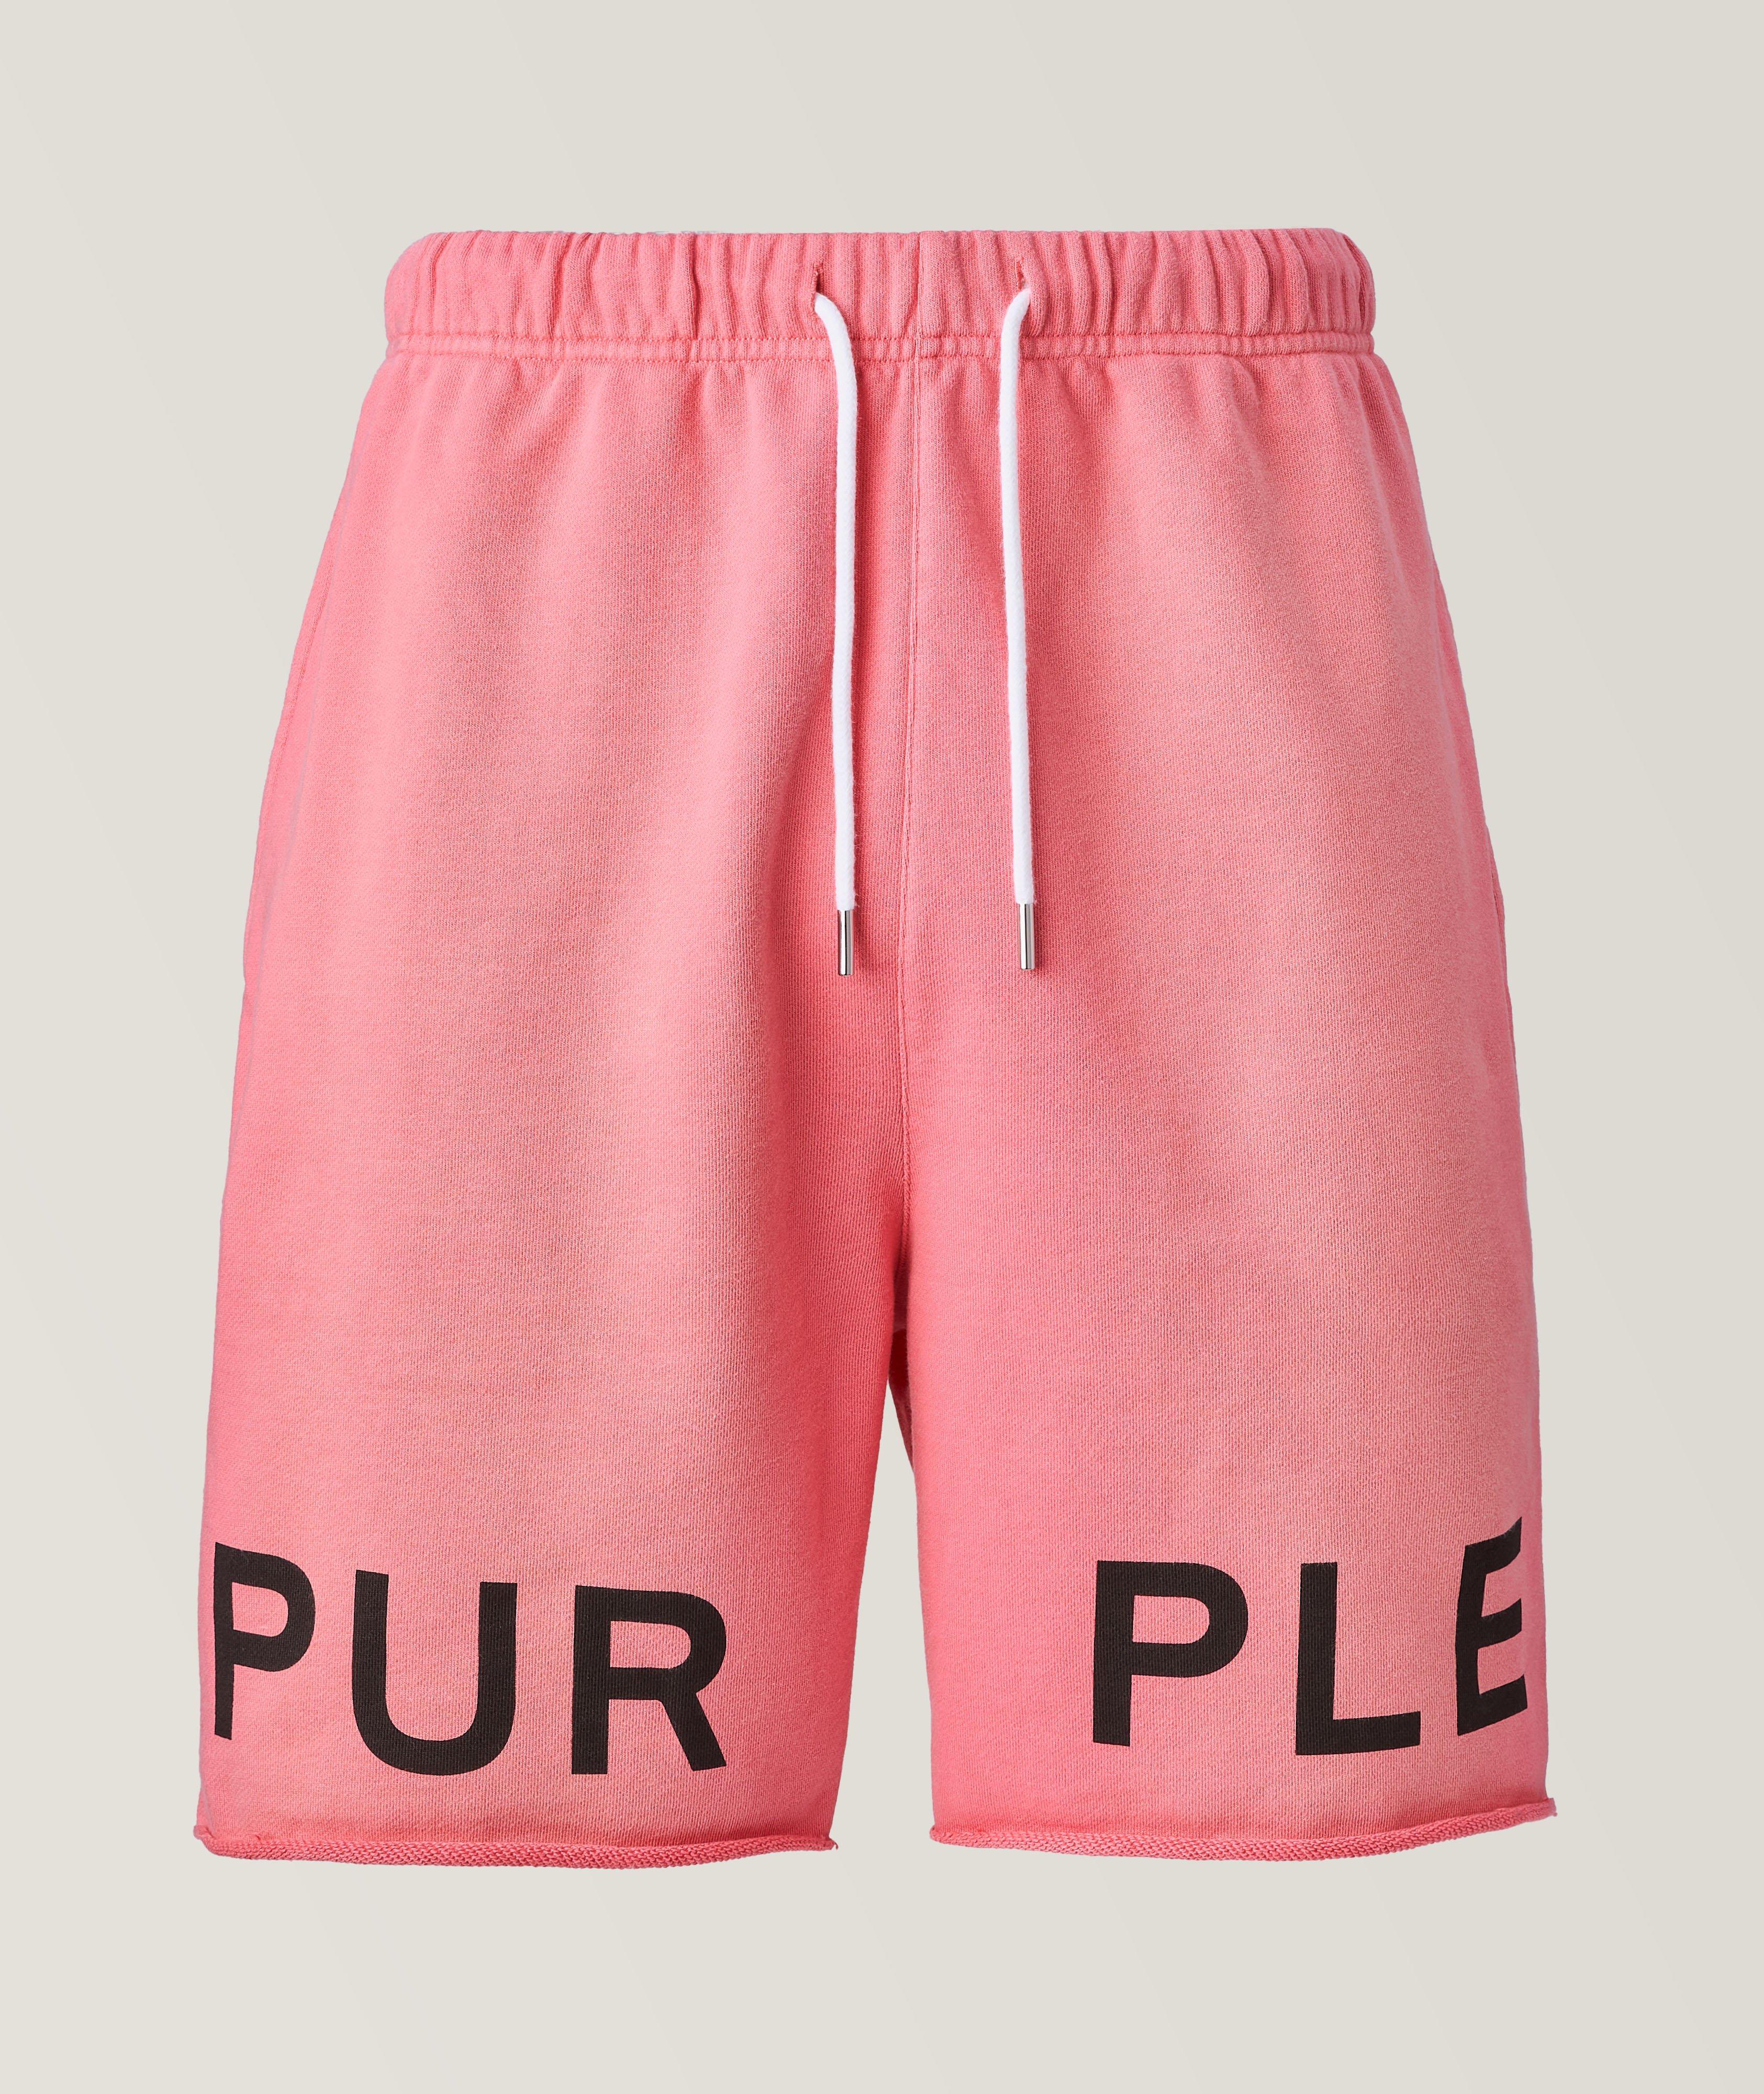 Terry Cotton Sweat Shorts  image 0